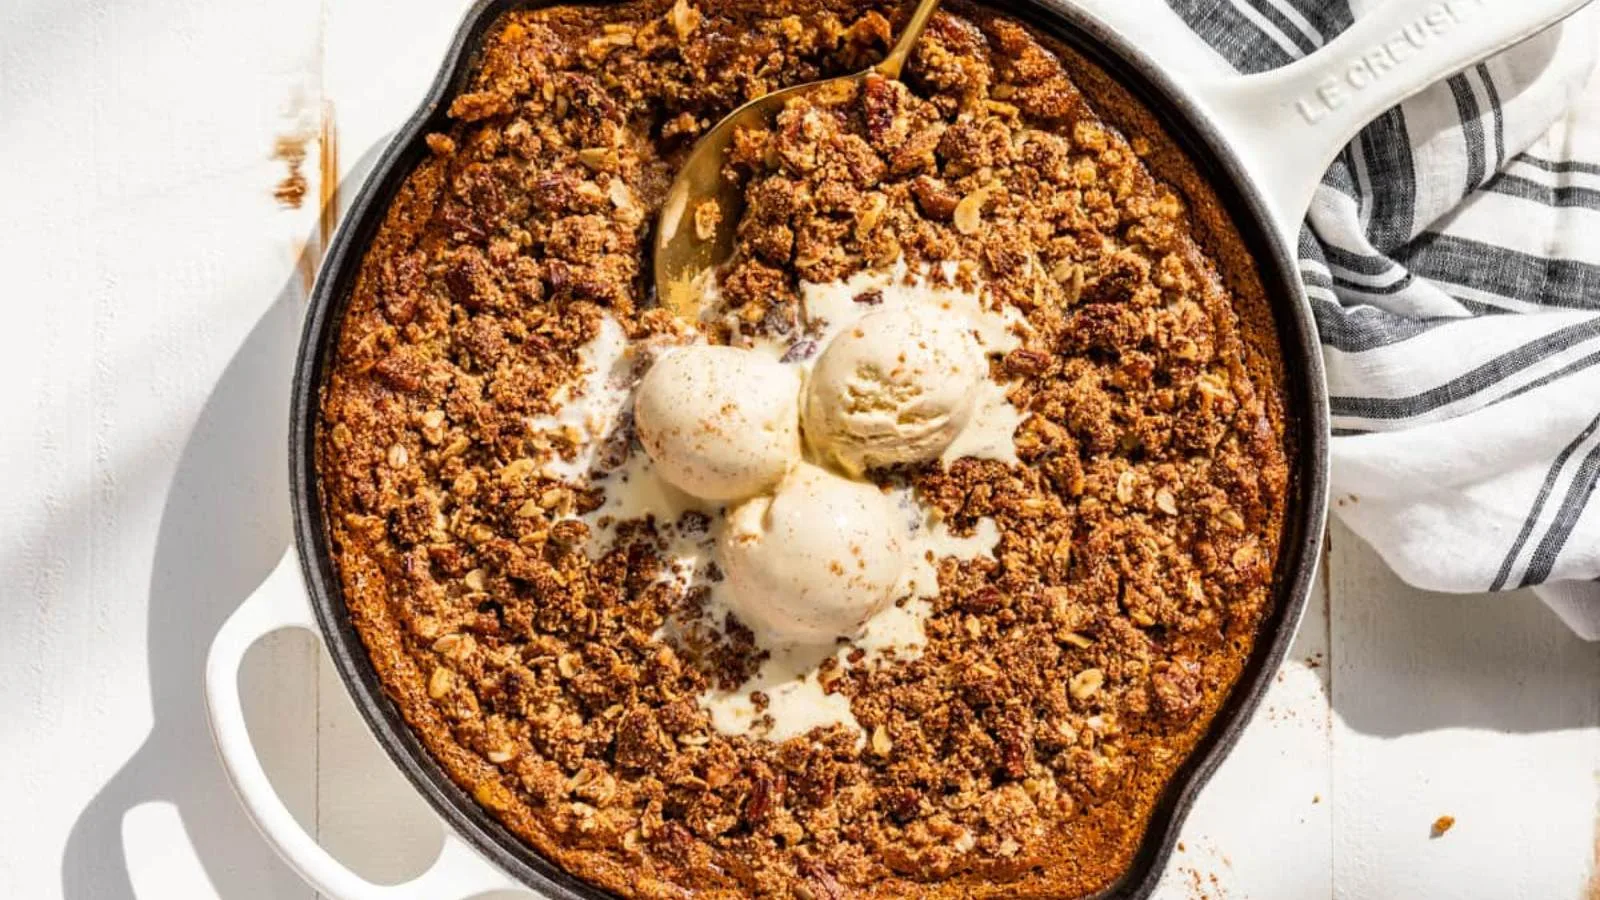  A skillet of pumpkin crisp with ice cream scoops.